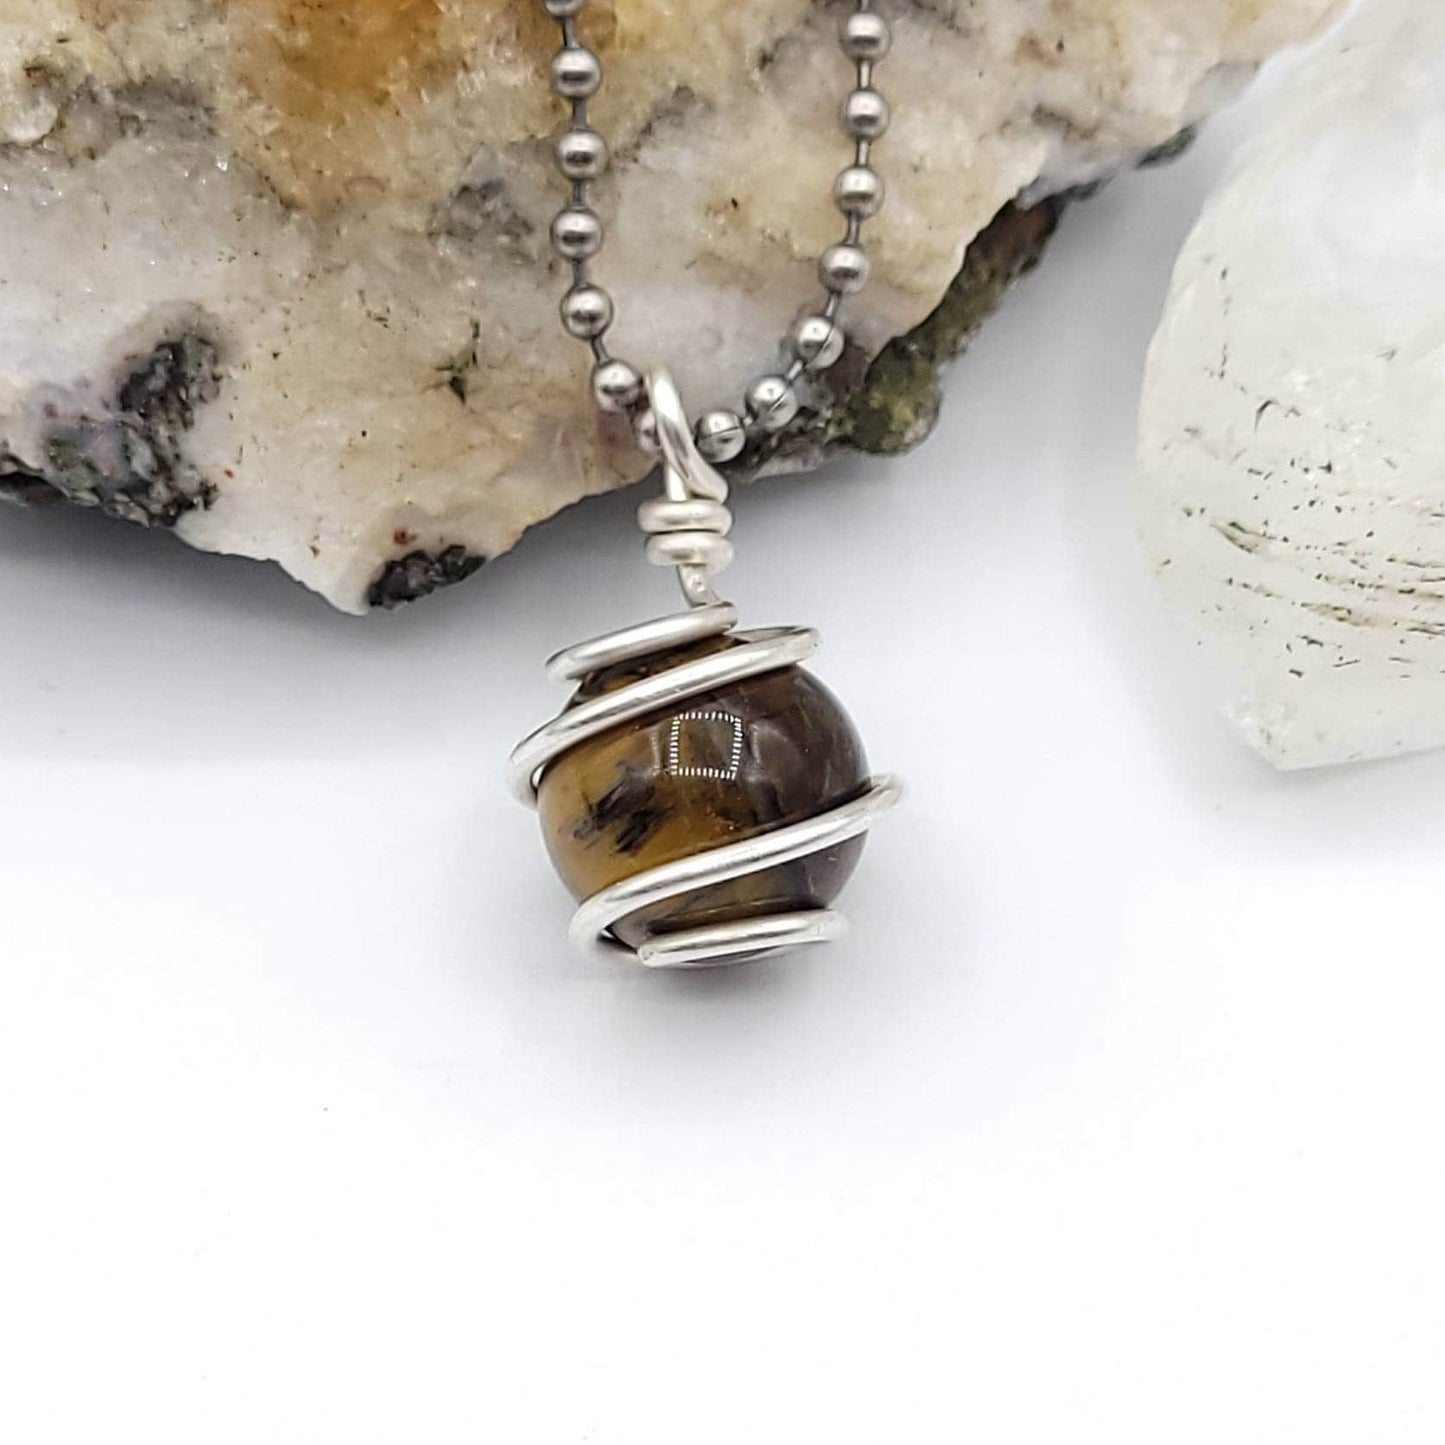 Tiger's Eye Sphere Necklace, Silver Wire Wrapped Tiger's Eye Pendant, Raw Tiger's Eye Jewelry